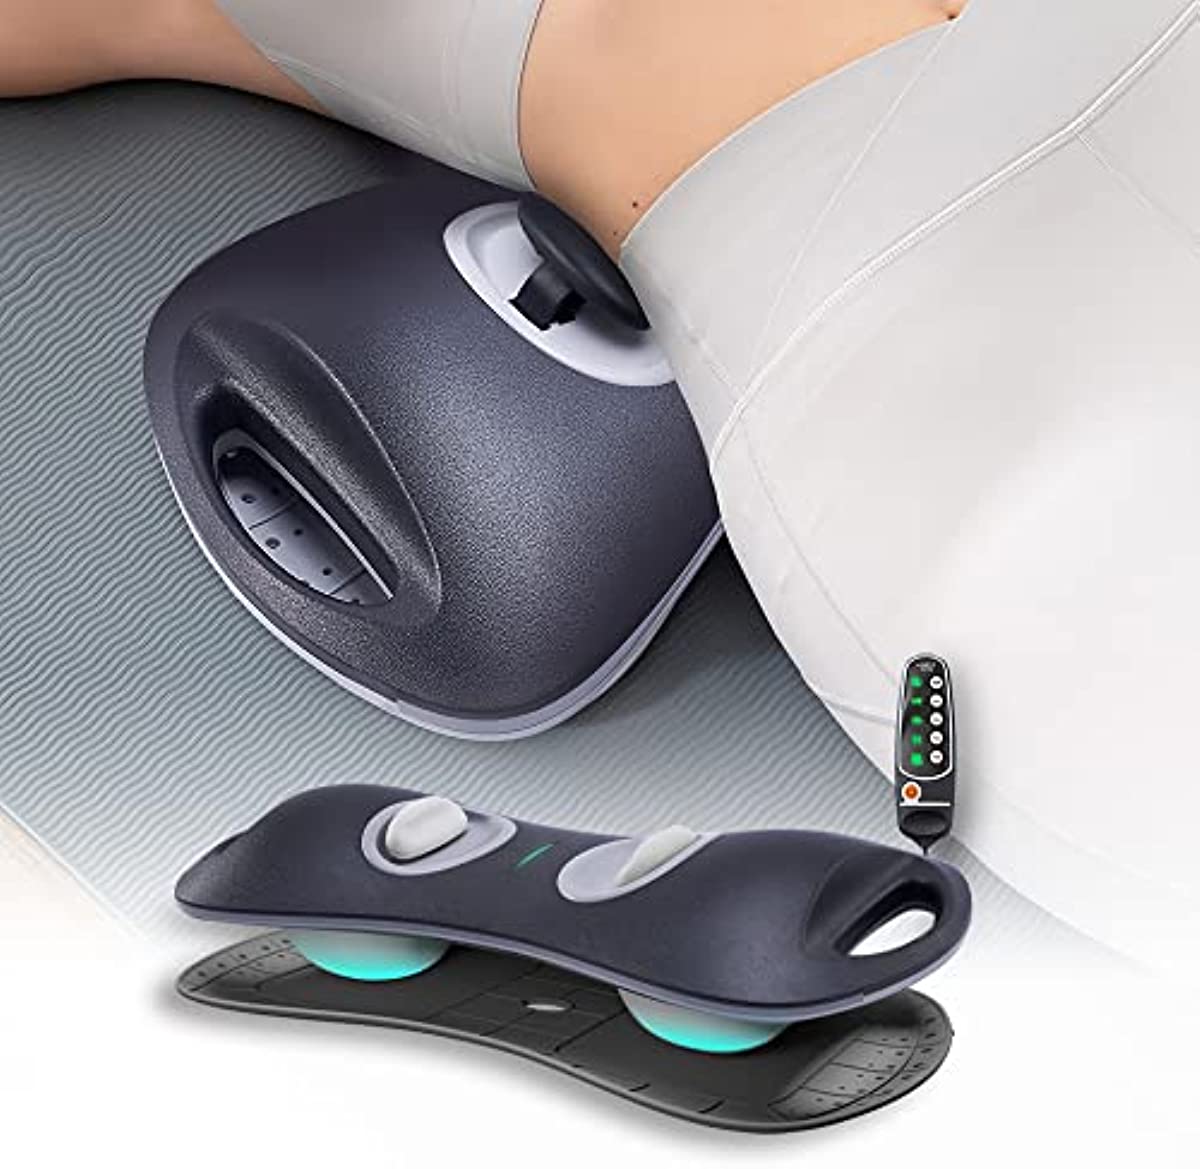 ALPHAY Multifunctional Lumbar Traction Device with Dynamic Lumbar Stretching & Knead Massage, Heat & Vibration Physical Therapy, Lower Back Massager Lumbar Traction at Home, Office, Waist Pain Relief